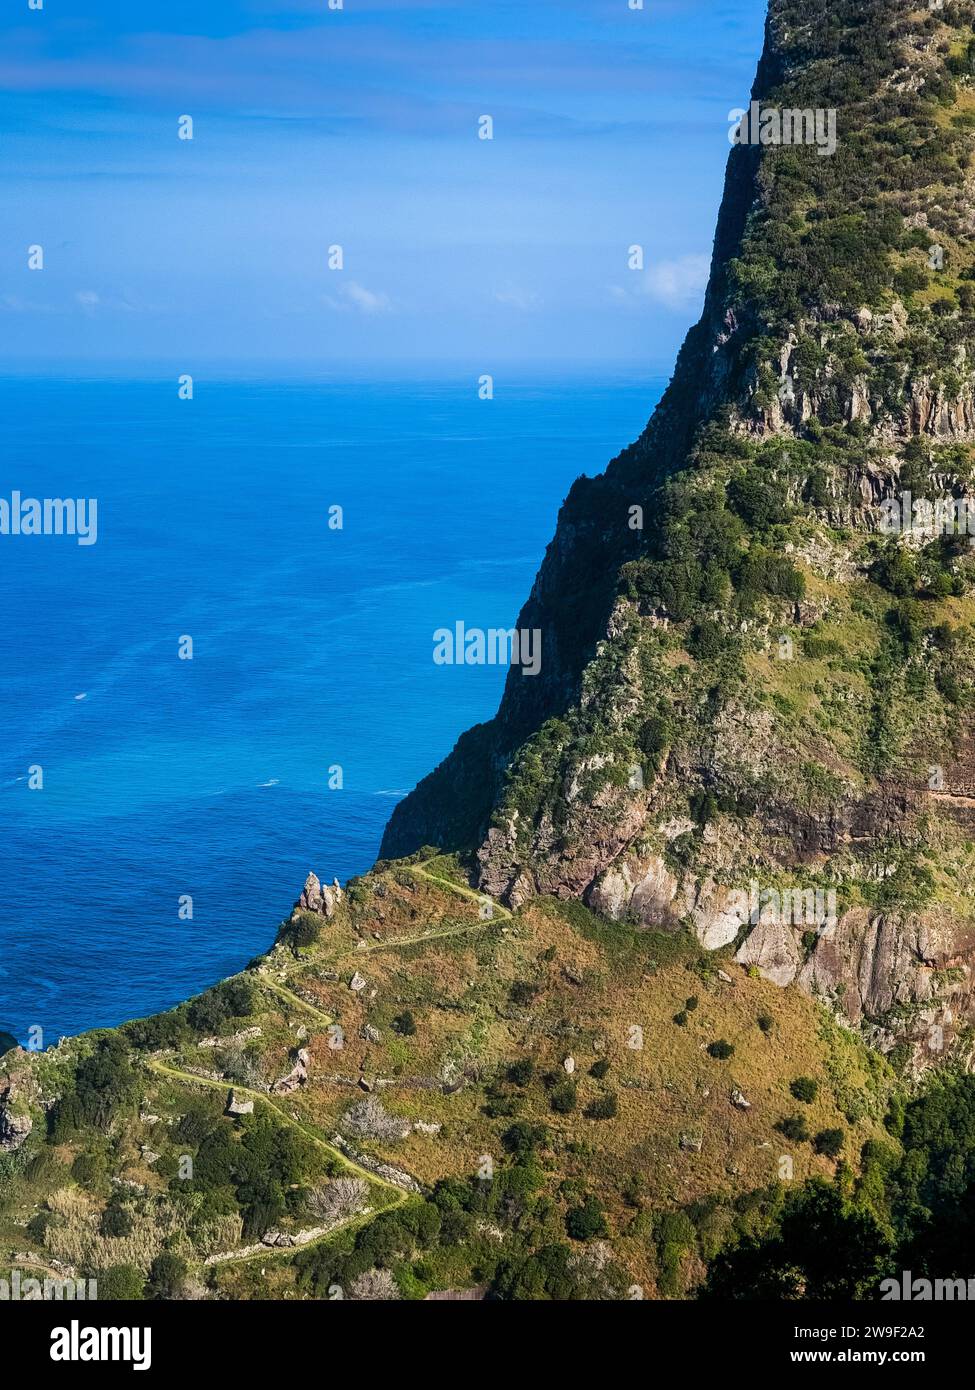 A stunning aerial view of a majestic mountain peak with its pointed spire, overlooking the tranquil blue ocean and lush green hills in the background Stock Photo